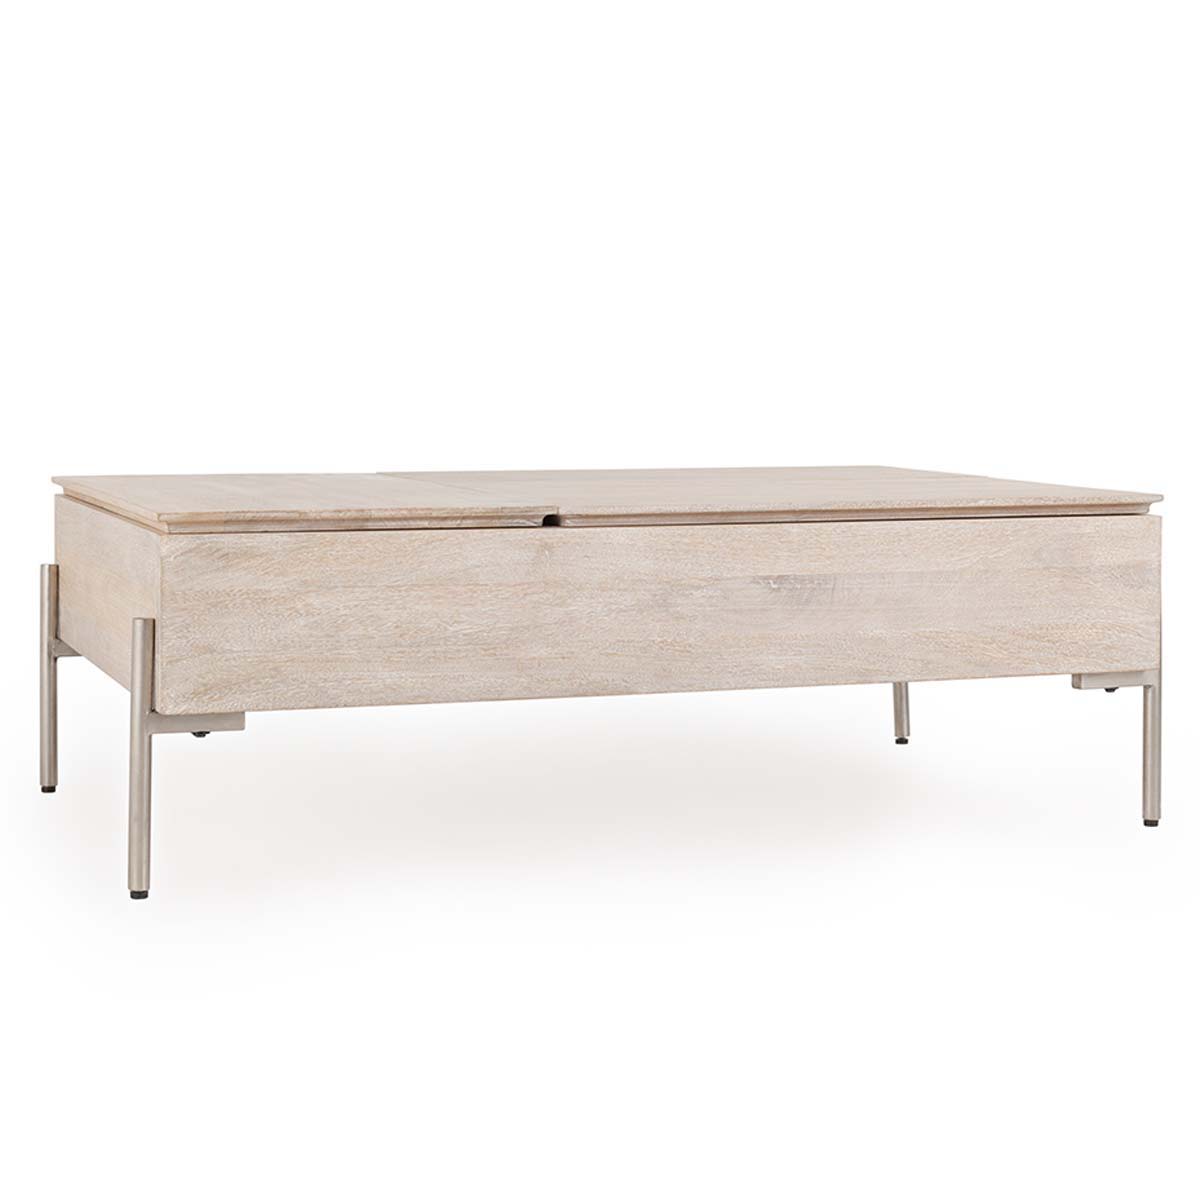 Rocklin - Double Lift Top Coffee Table - White